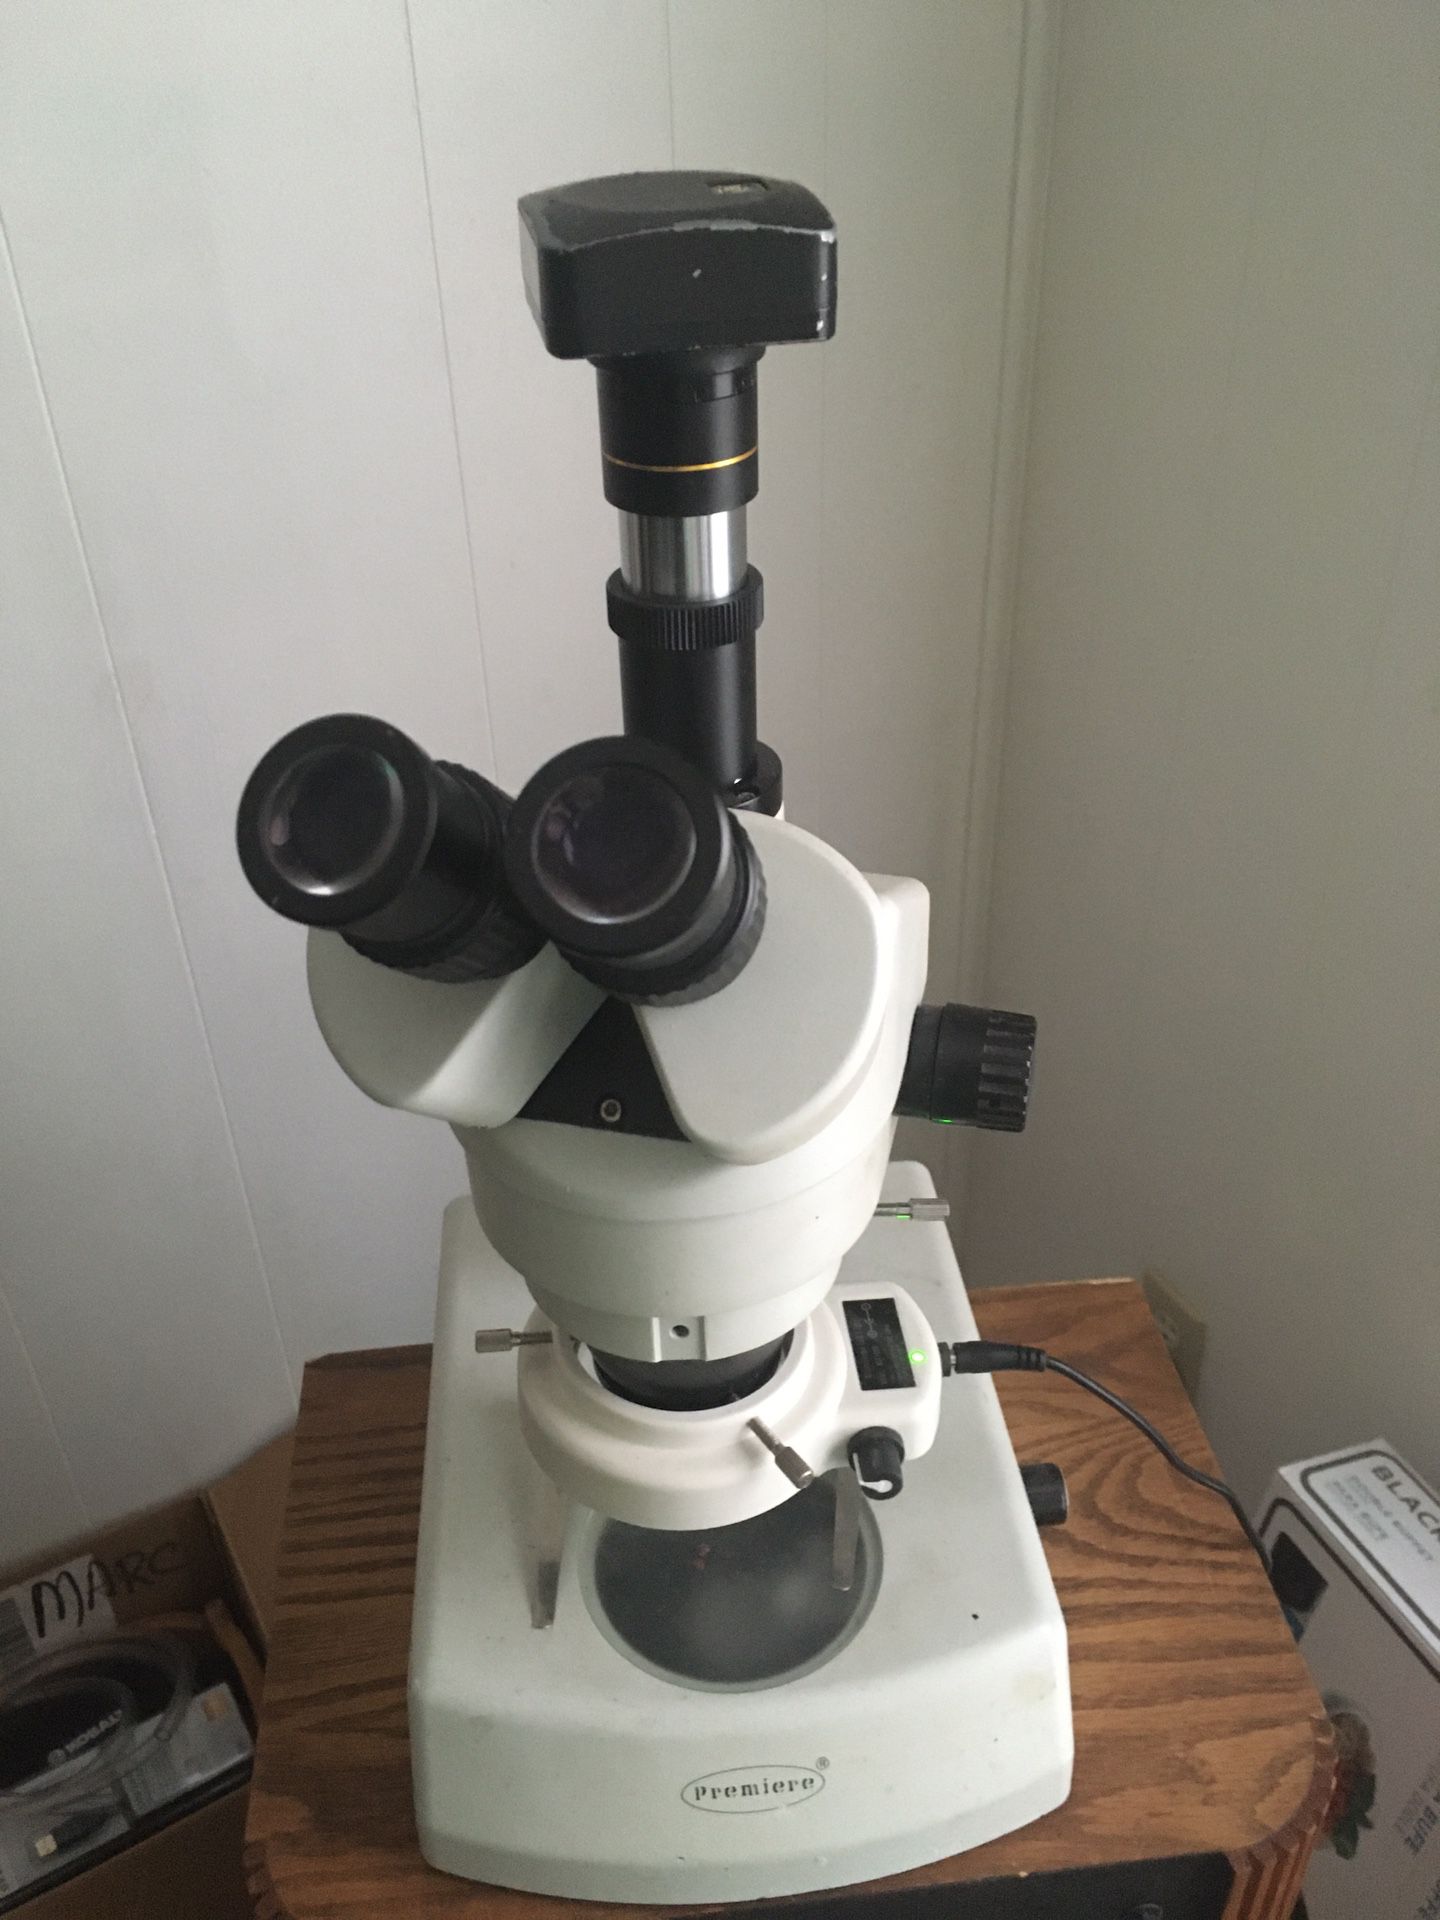 Jewelers grade stereo microscope with 9 megapixel camera